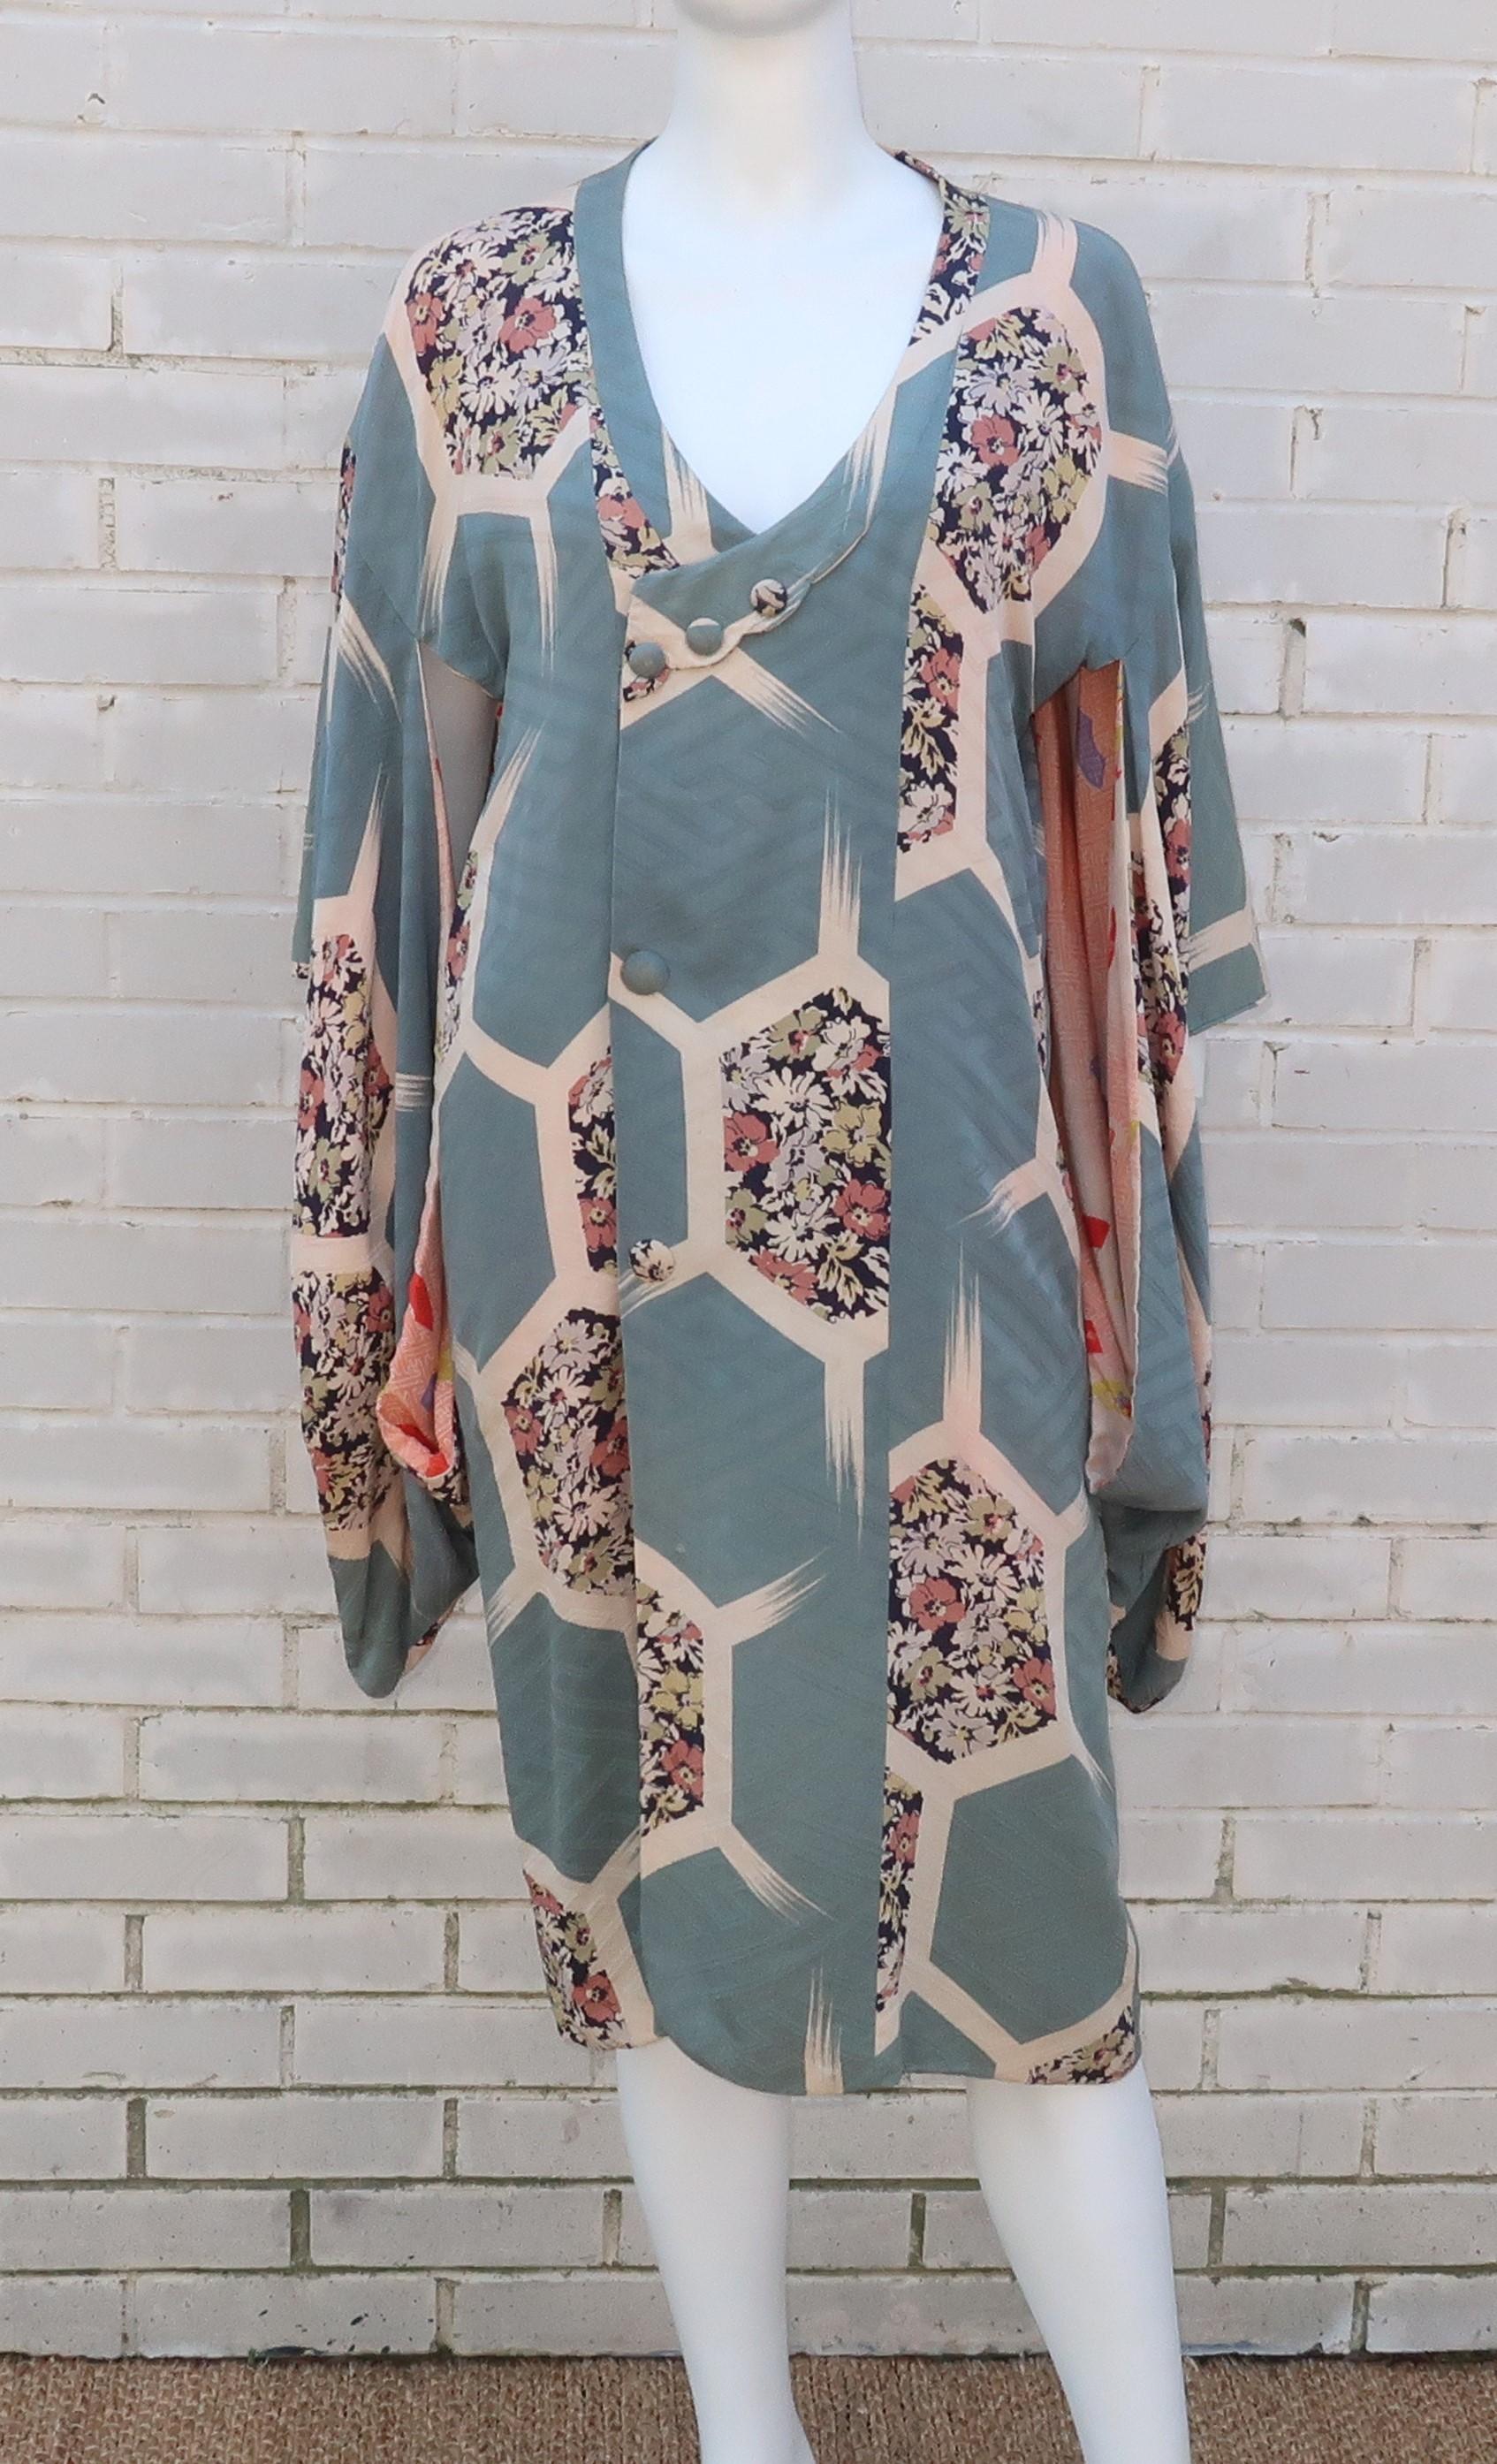 This vintage Japanese silk jacquard robe is reminiscent of the Bohemian era styles of the early 20th Century when artistic women would pair Far Eastern looks with more traditional attire.  The honeycomb pattern is accented with a floral design in